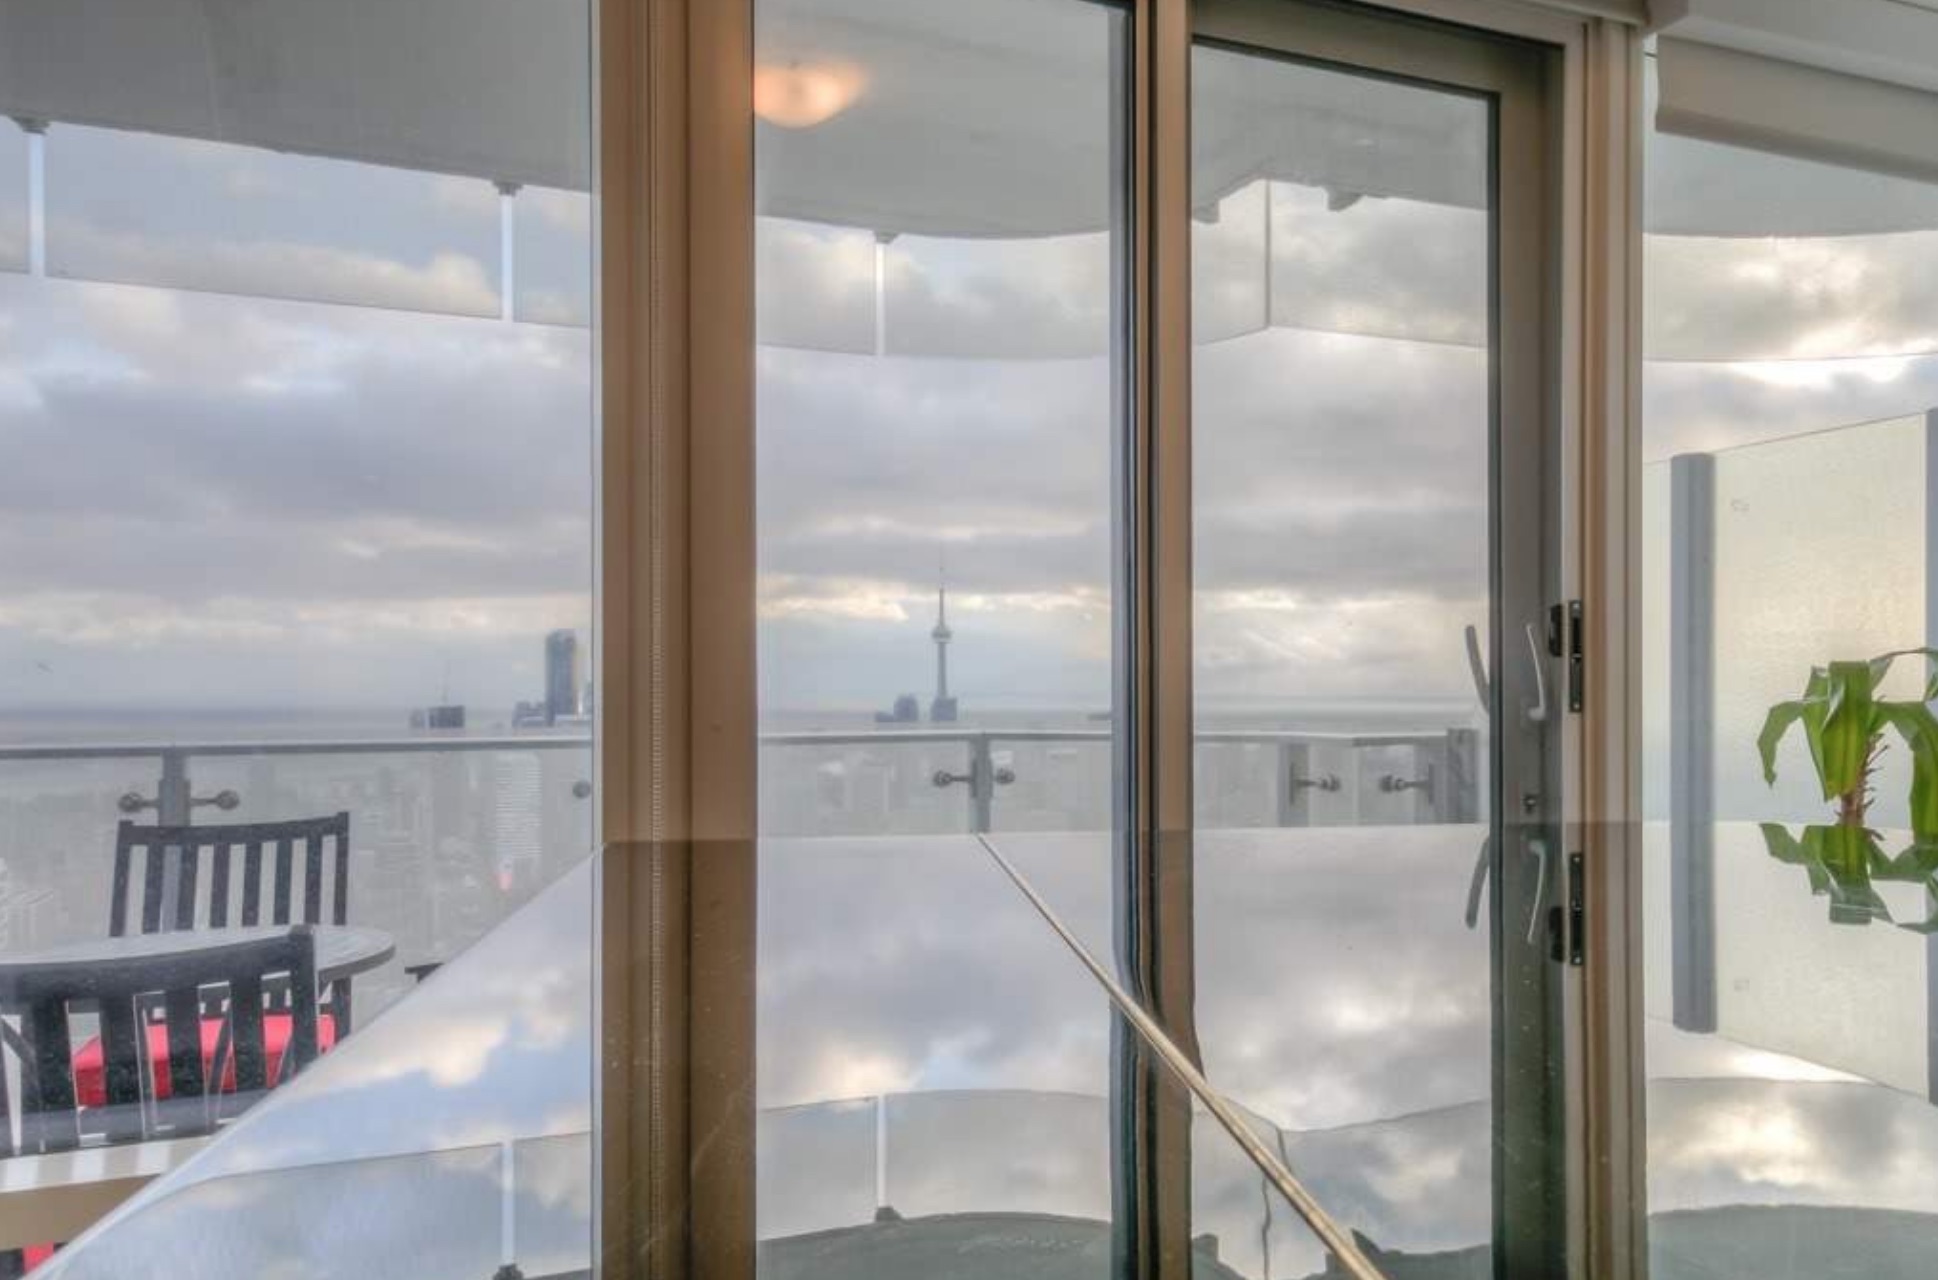 Floor-to-ceiling windows that reflect the CN Tower in the distance